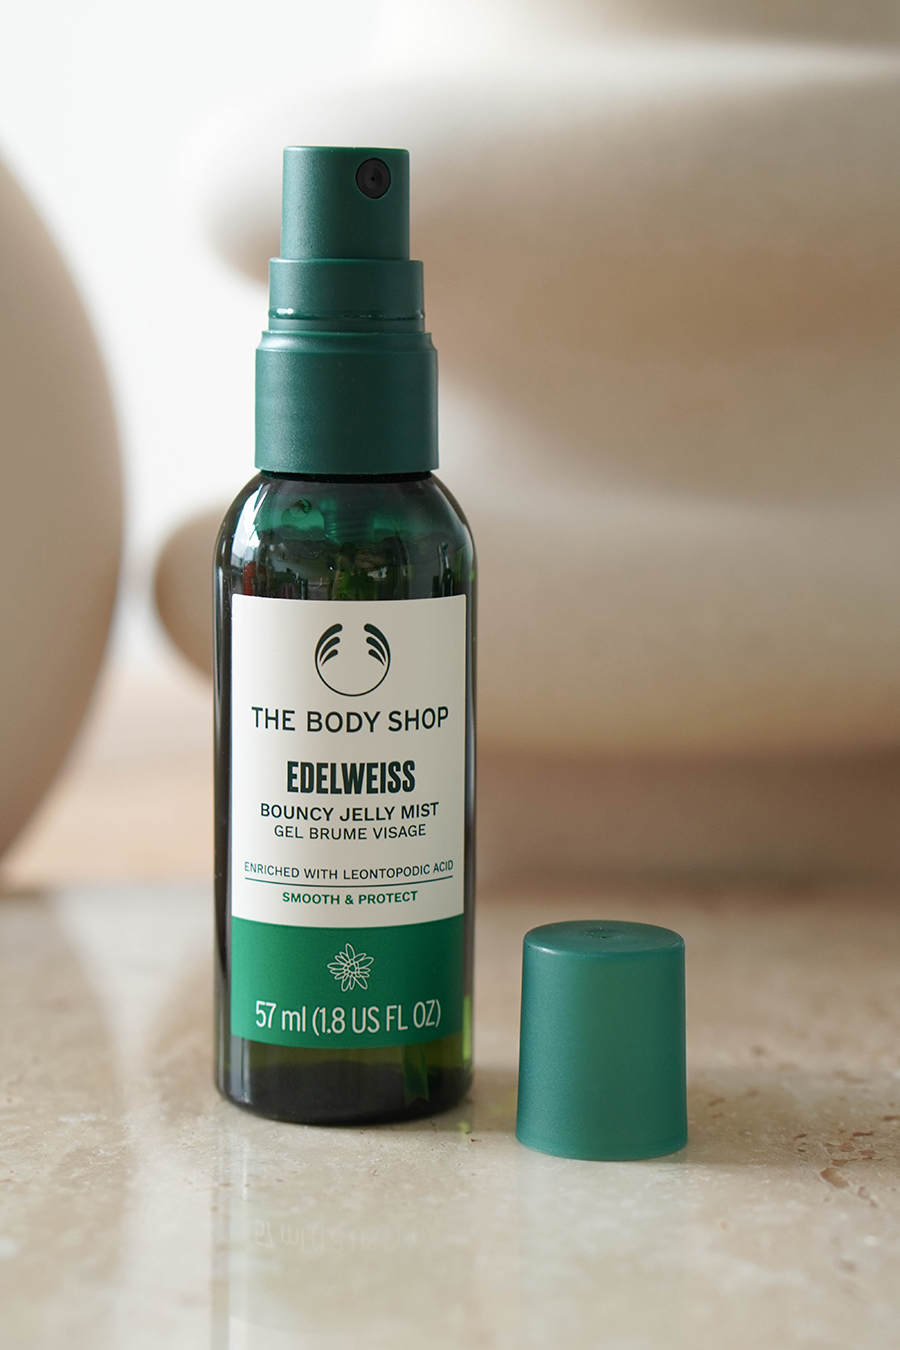 The Body Shop Edelweiss skincare